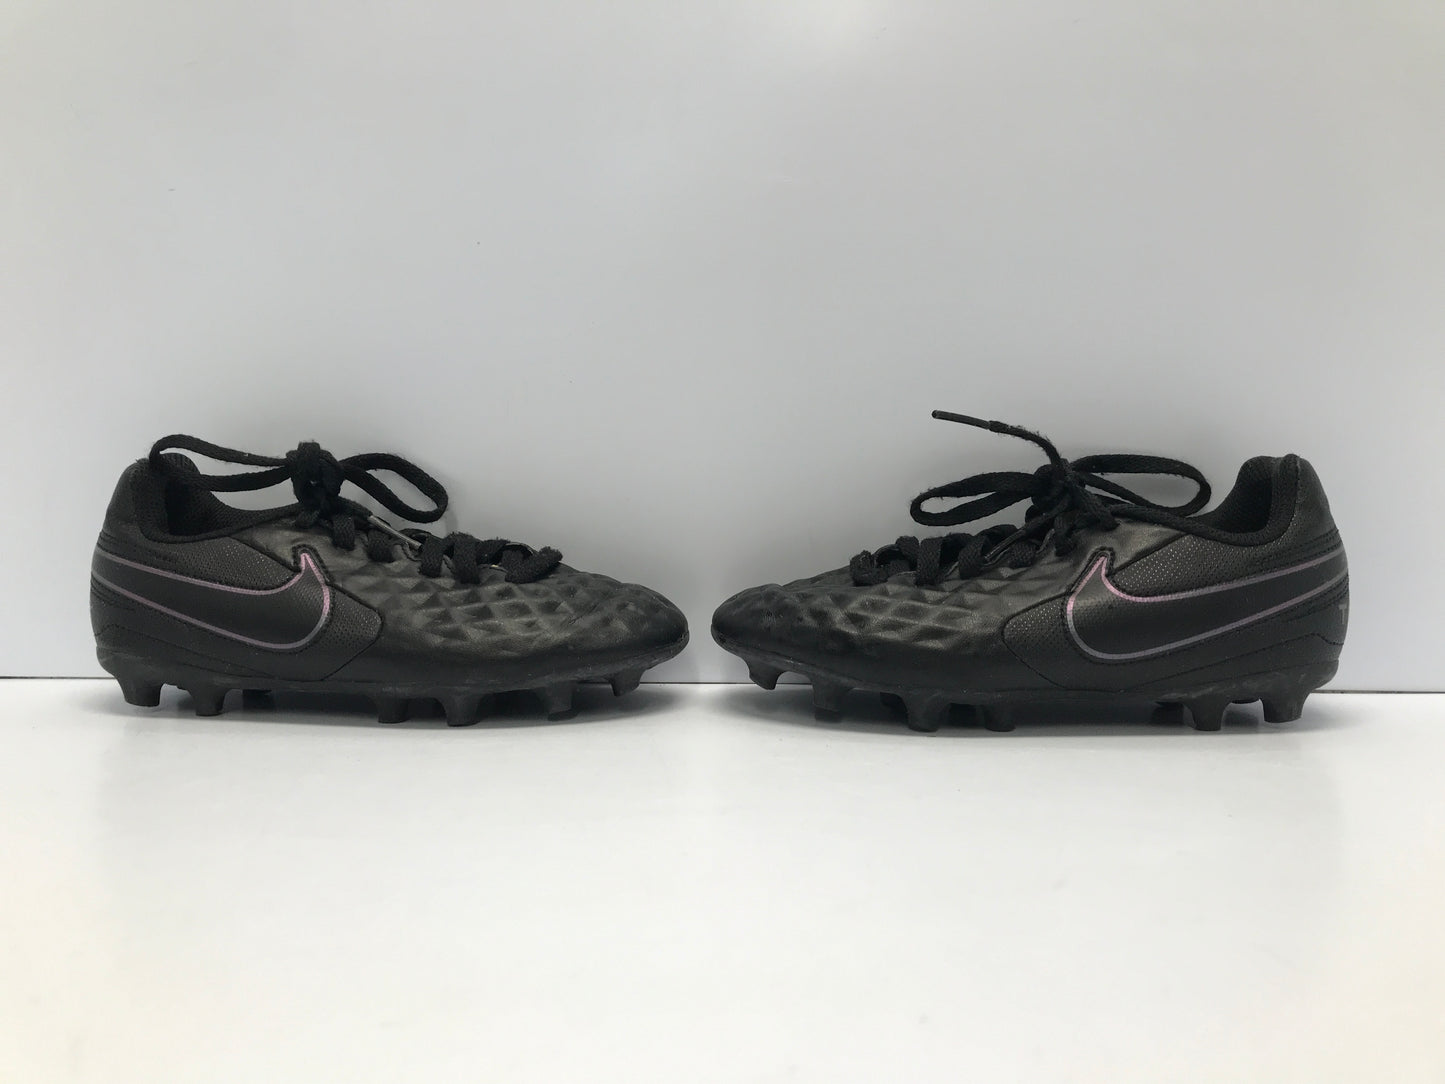 Soccer Shoes Cleats Child Size 12 Nike Tiemp Black Ghost Excellent